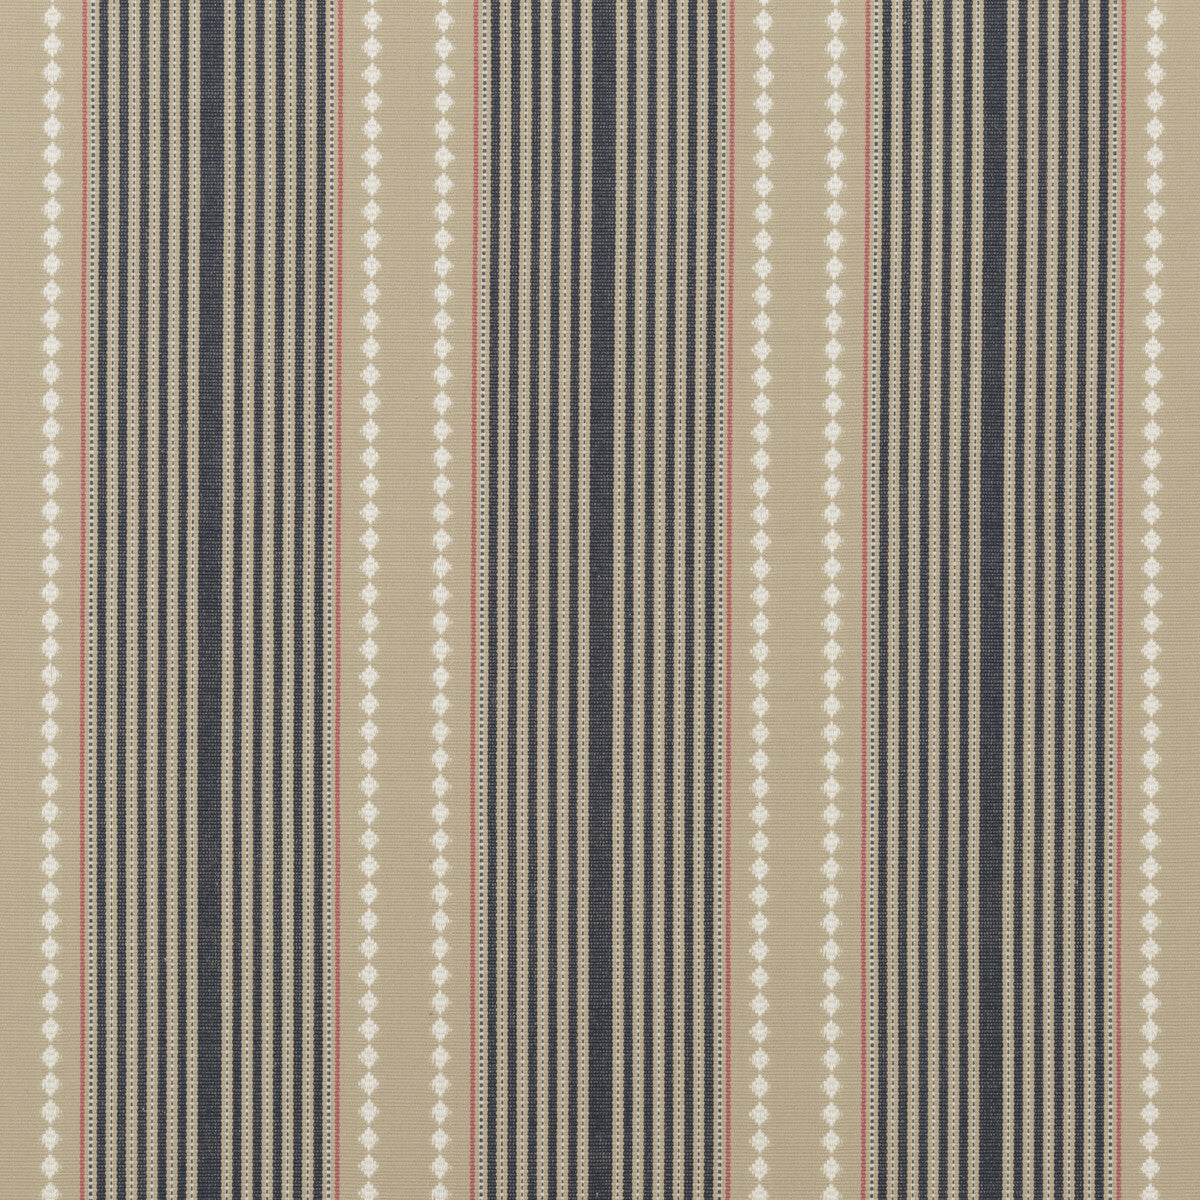 Brighton Stripe fabric in indigo/linen color - pattern FD753.H49.0 - by Mulberry in the Festival collection